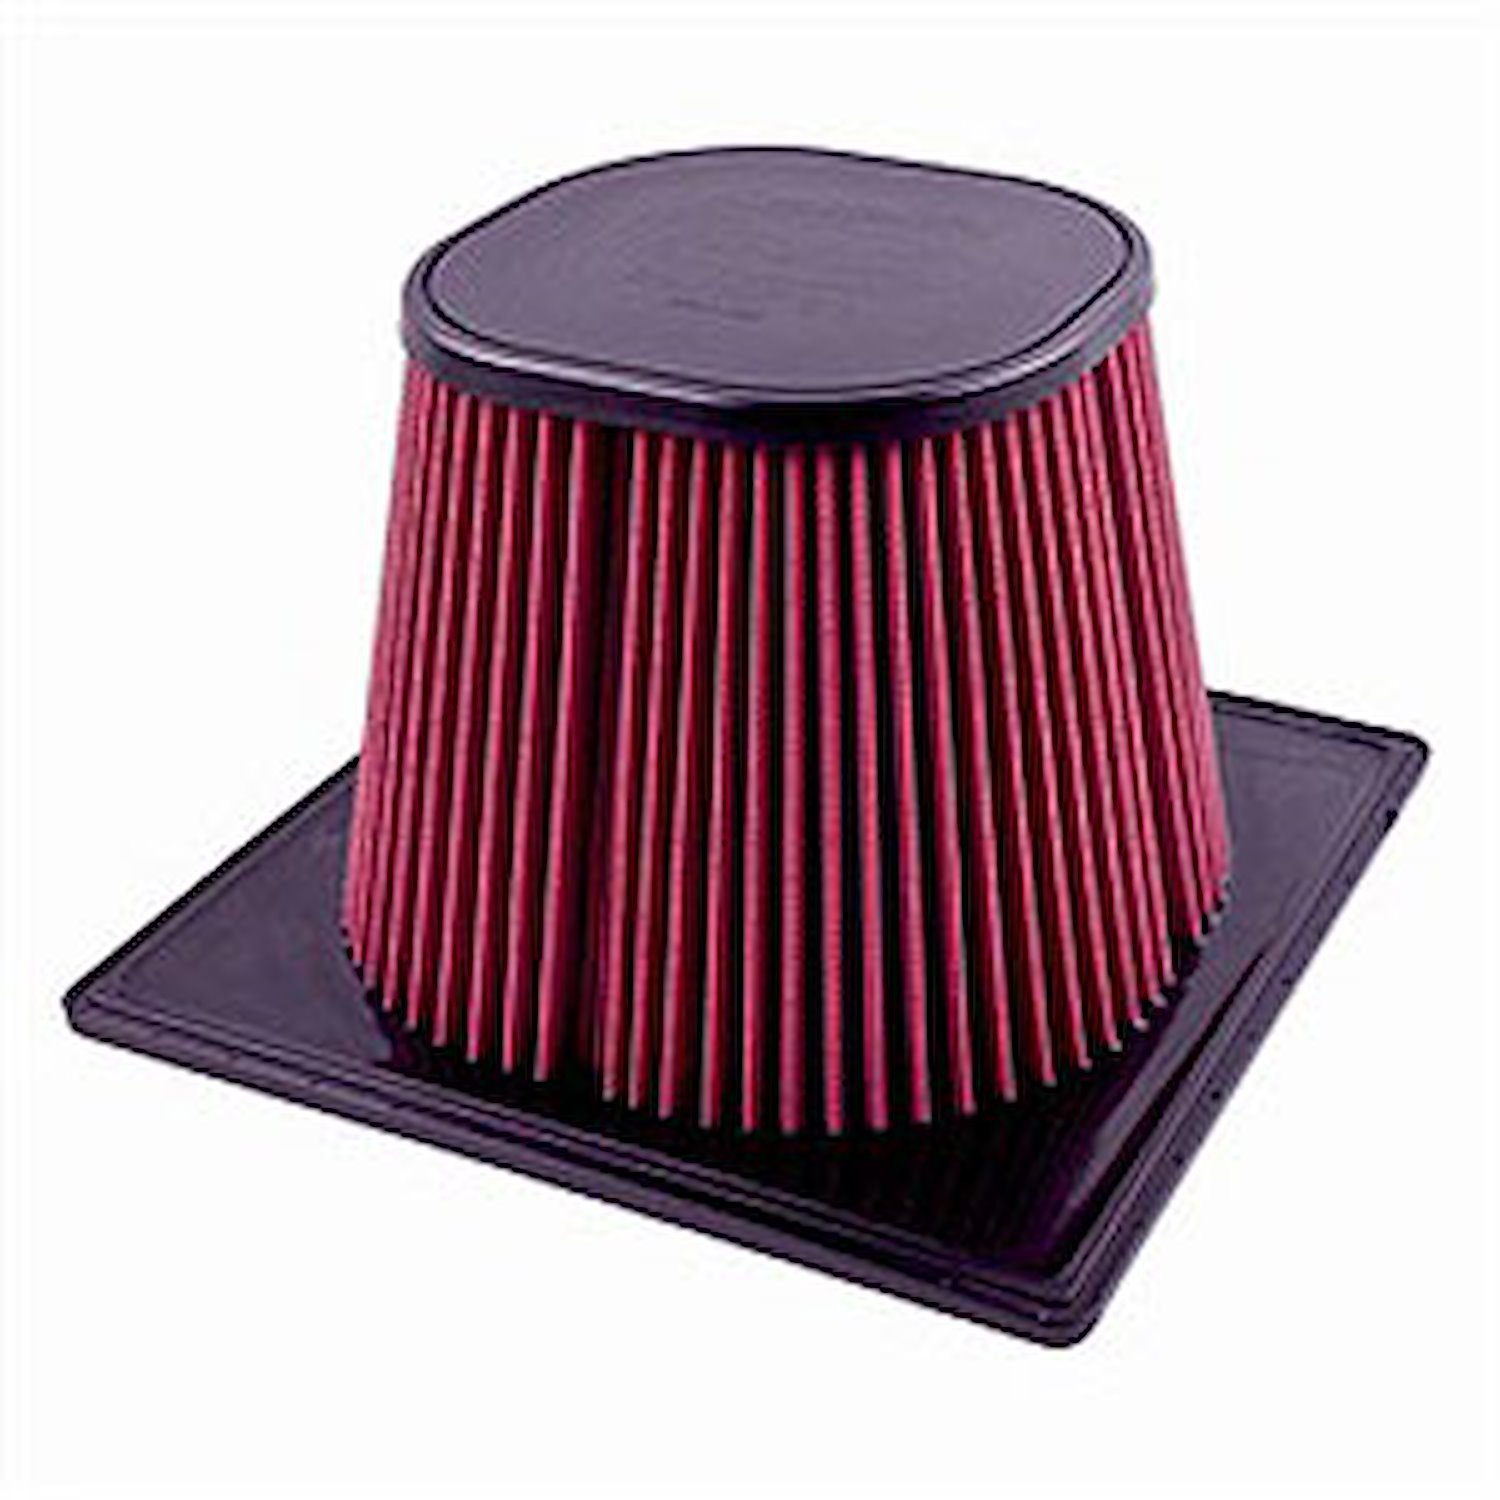 SynthaMax "Dry" OE Replacement Filter 2003-2007 Ram Pickup 2500-3500 5.9L